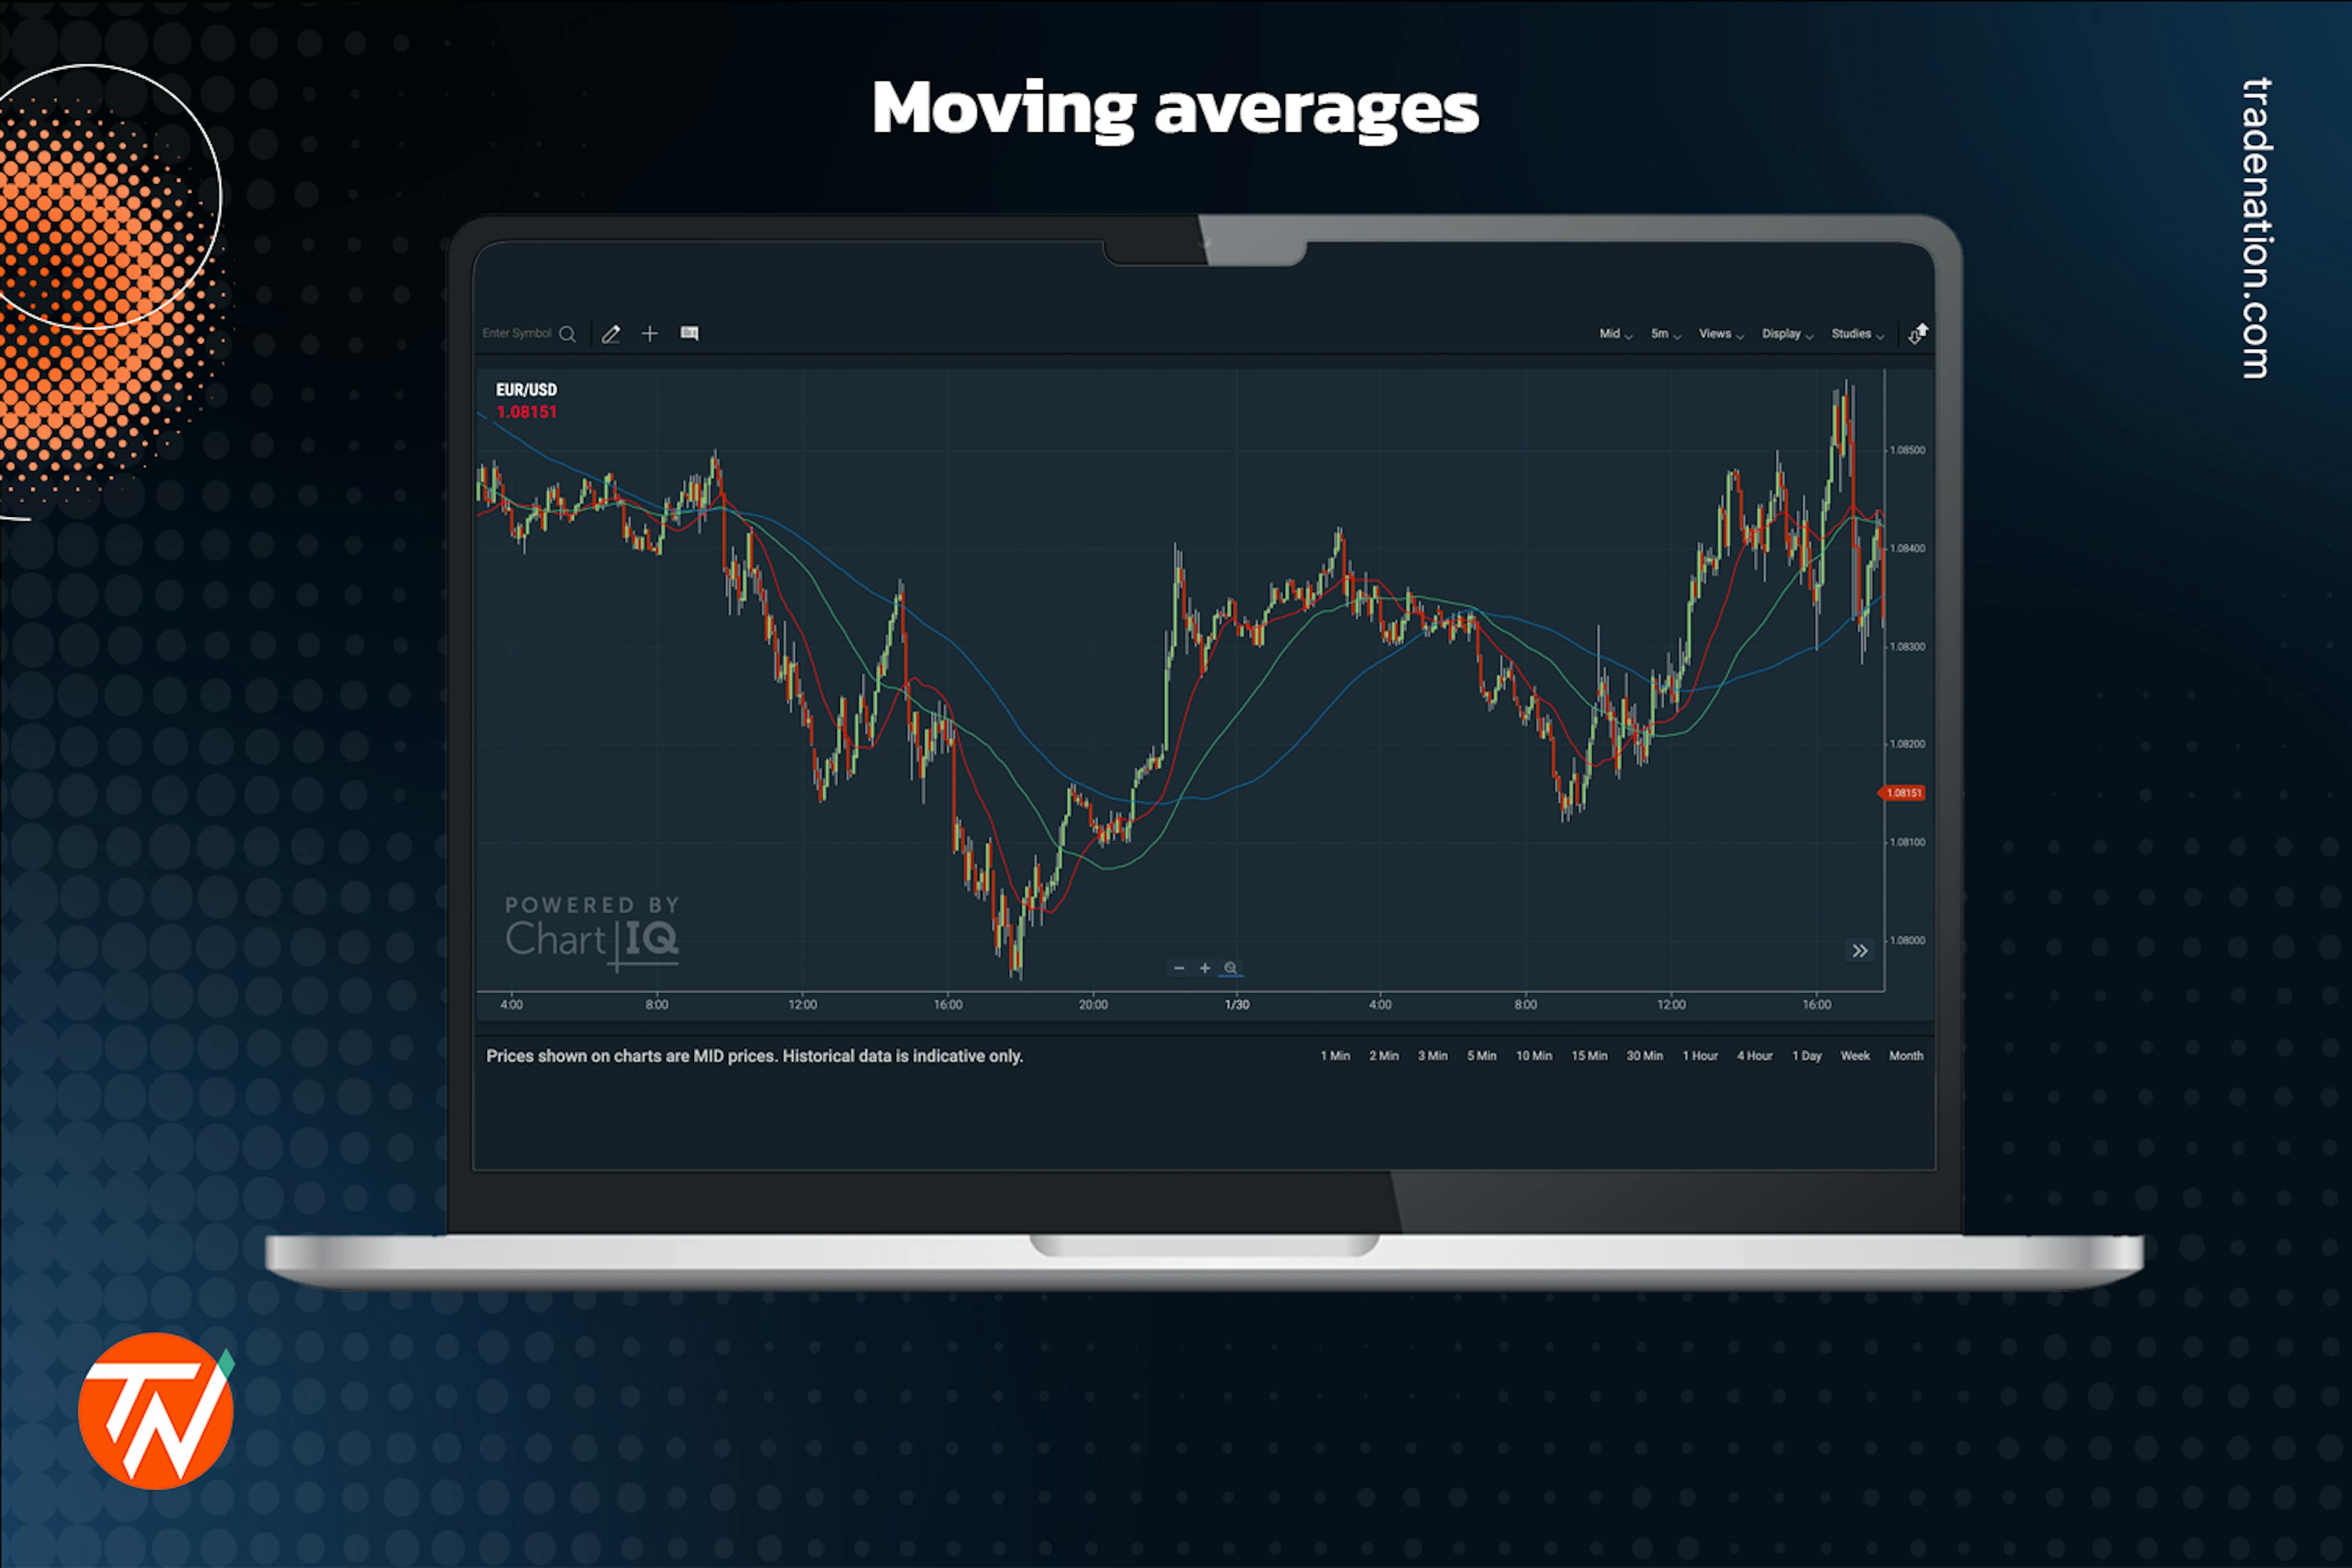 Moving averages in trading demonstrated